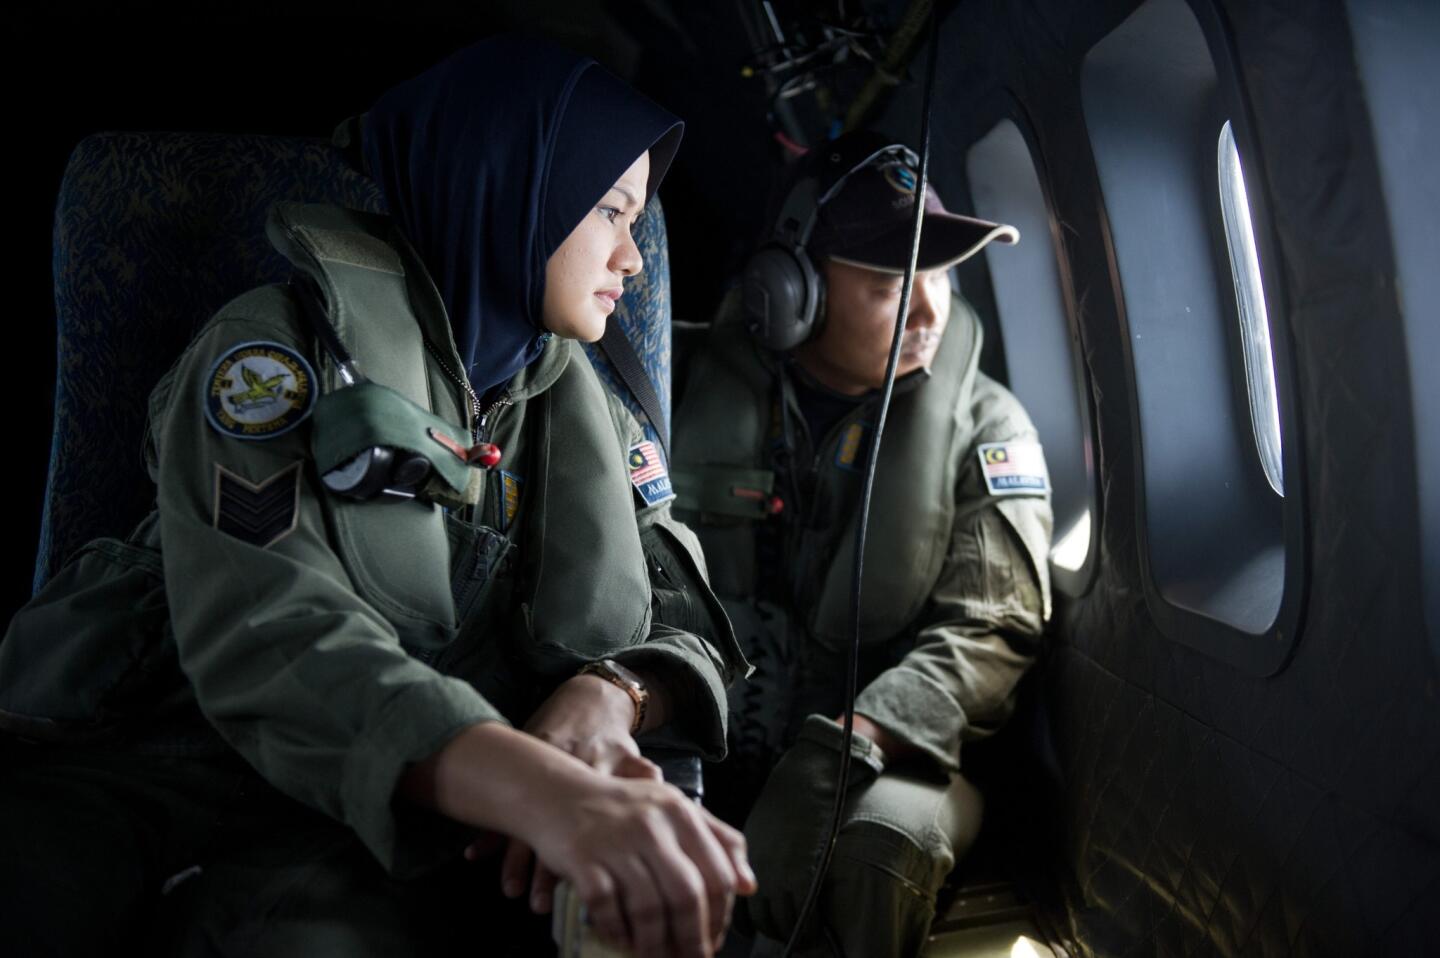 Crew members look outside windows from a Malaysian Air Force CN235 aircraft during a search and rescue operation to find the missing Malaysia Airlines flight MH370 plane over the Strait of Malacca on March 15.